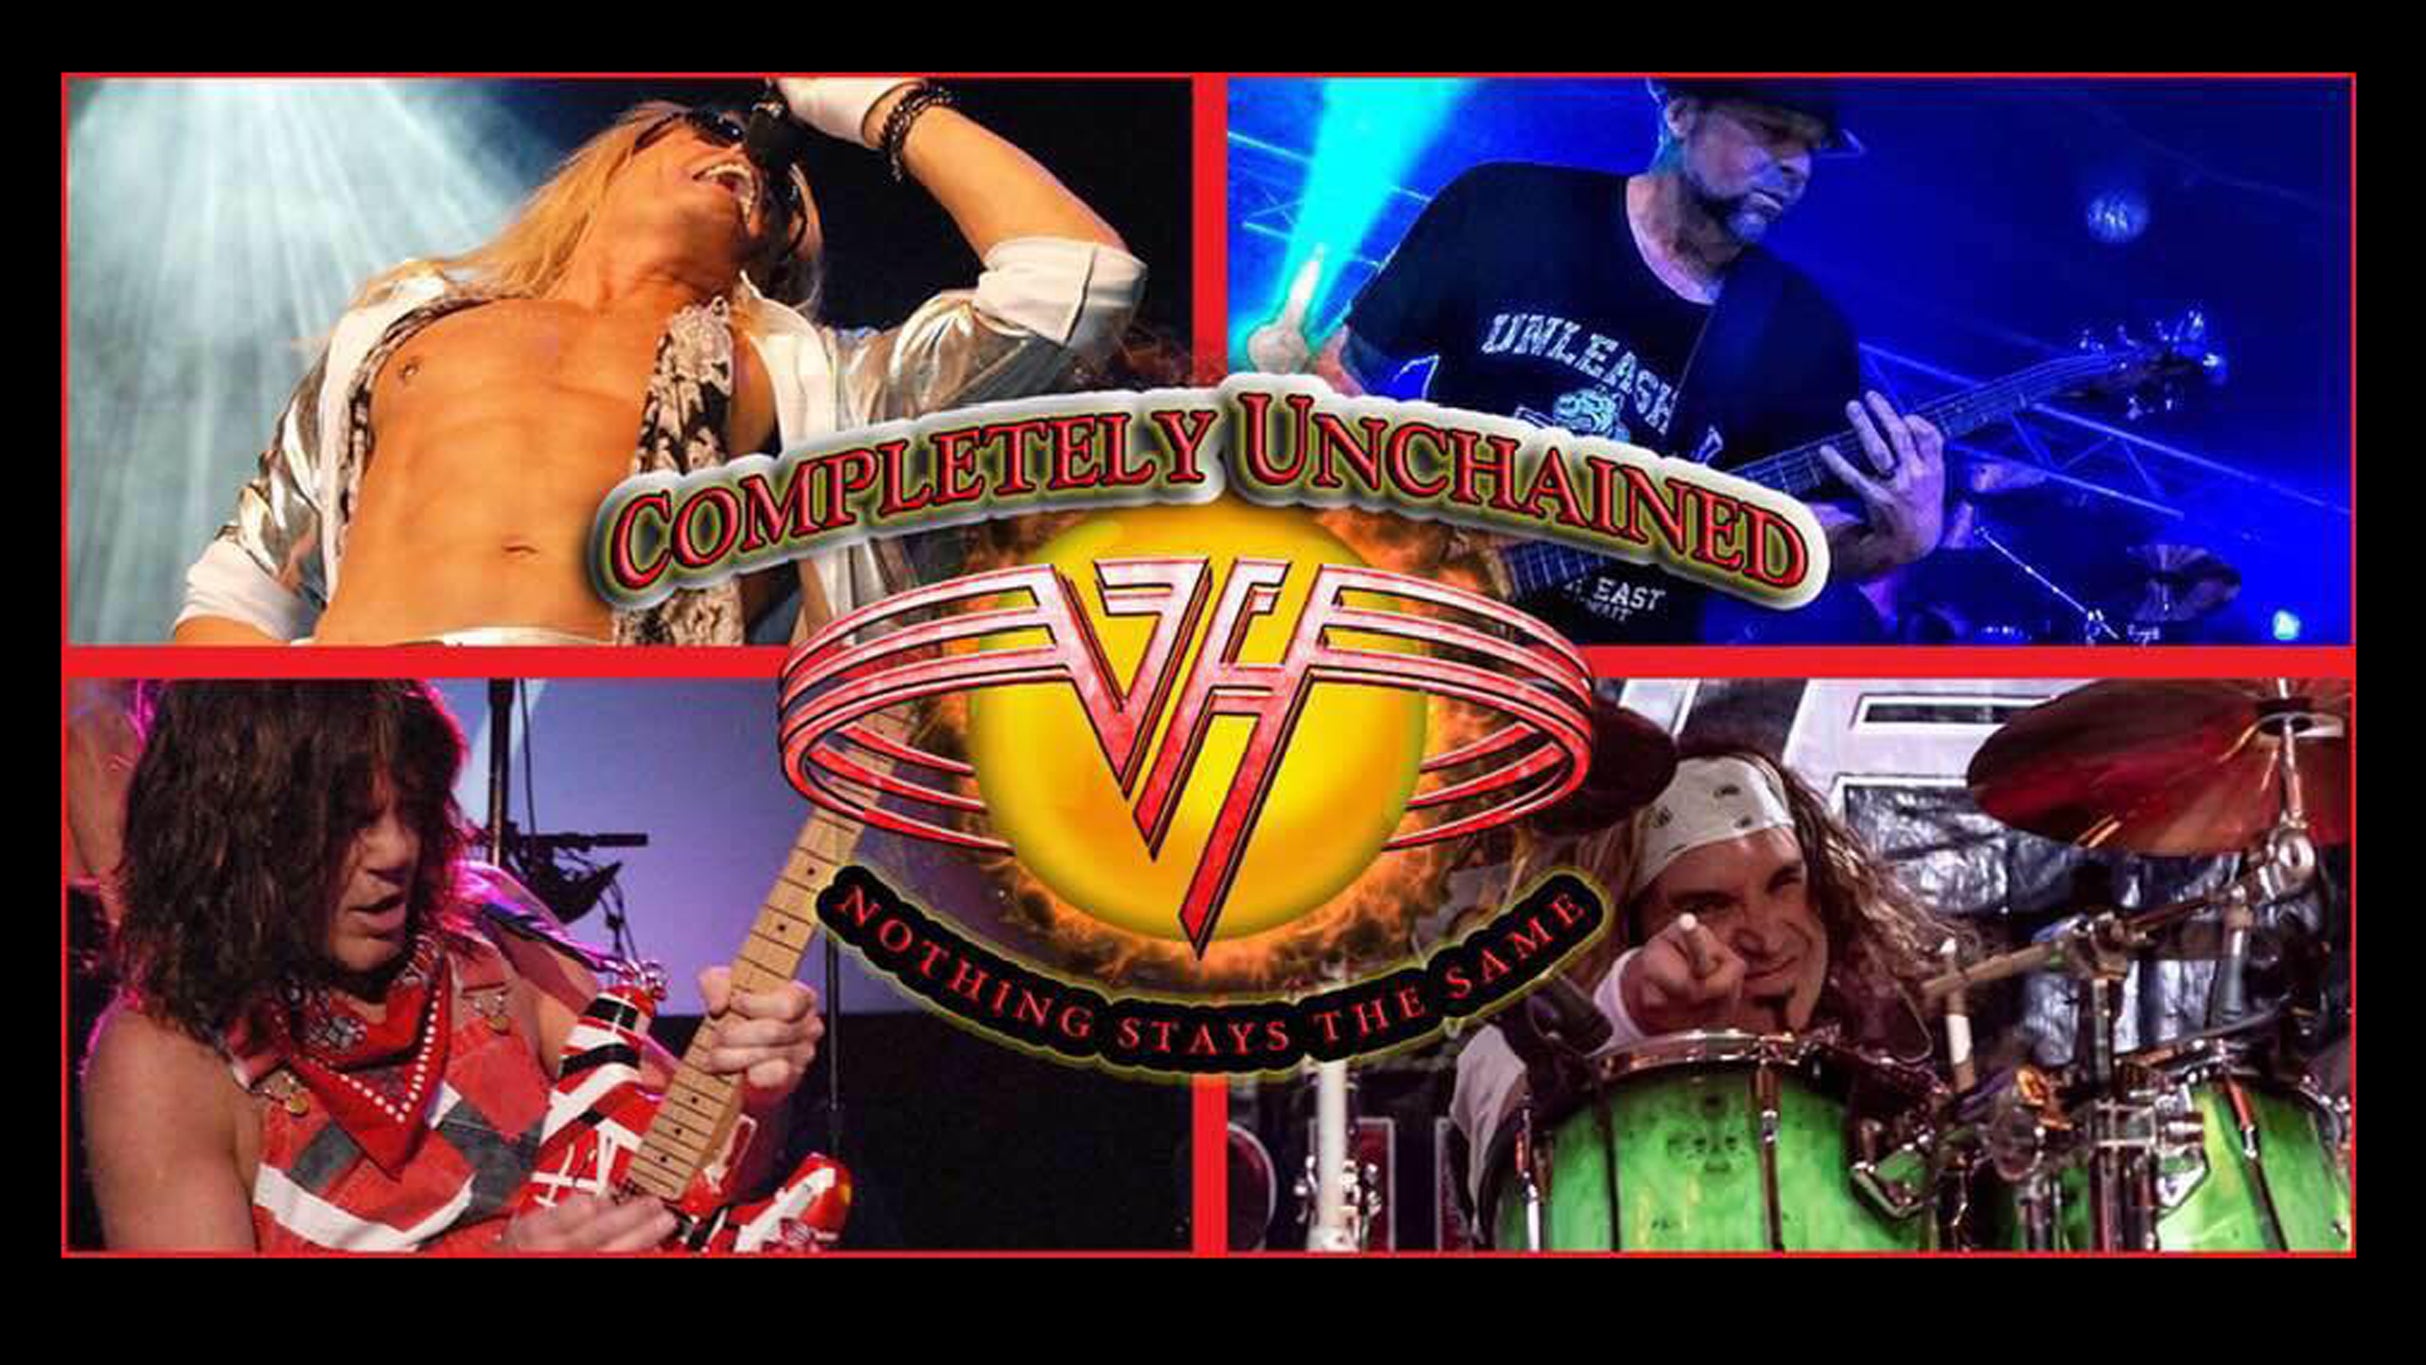 Completely Unchained - The Ultimate Van Halen Production